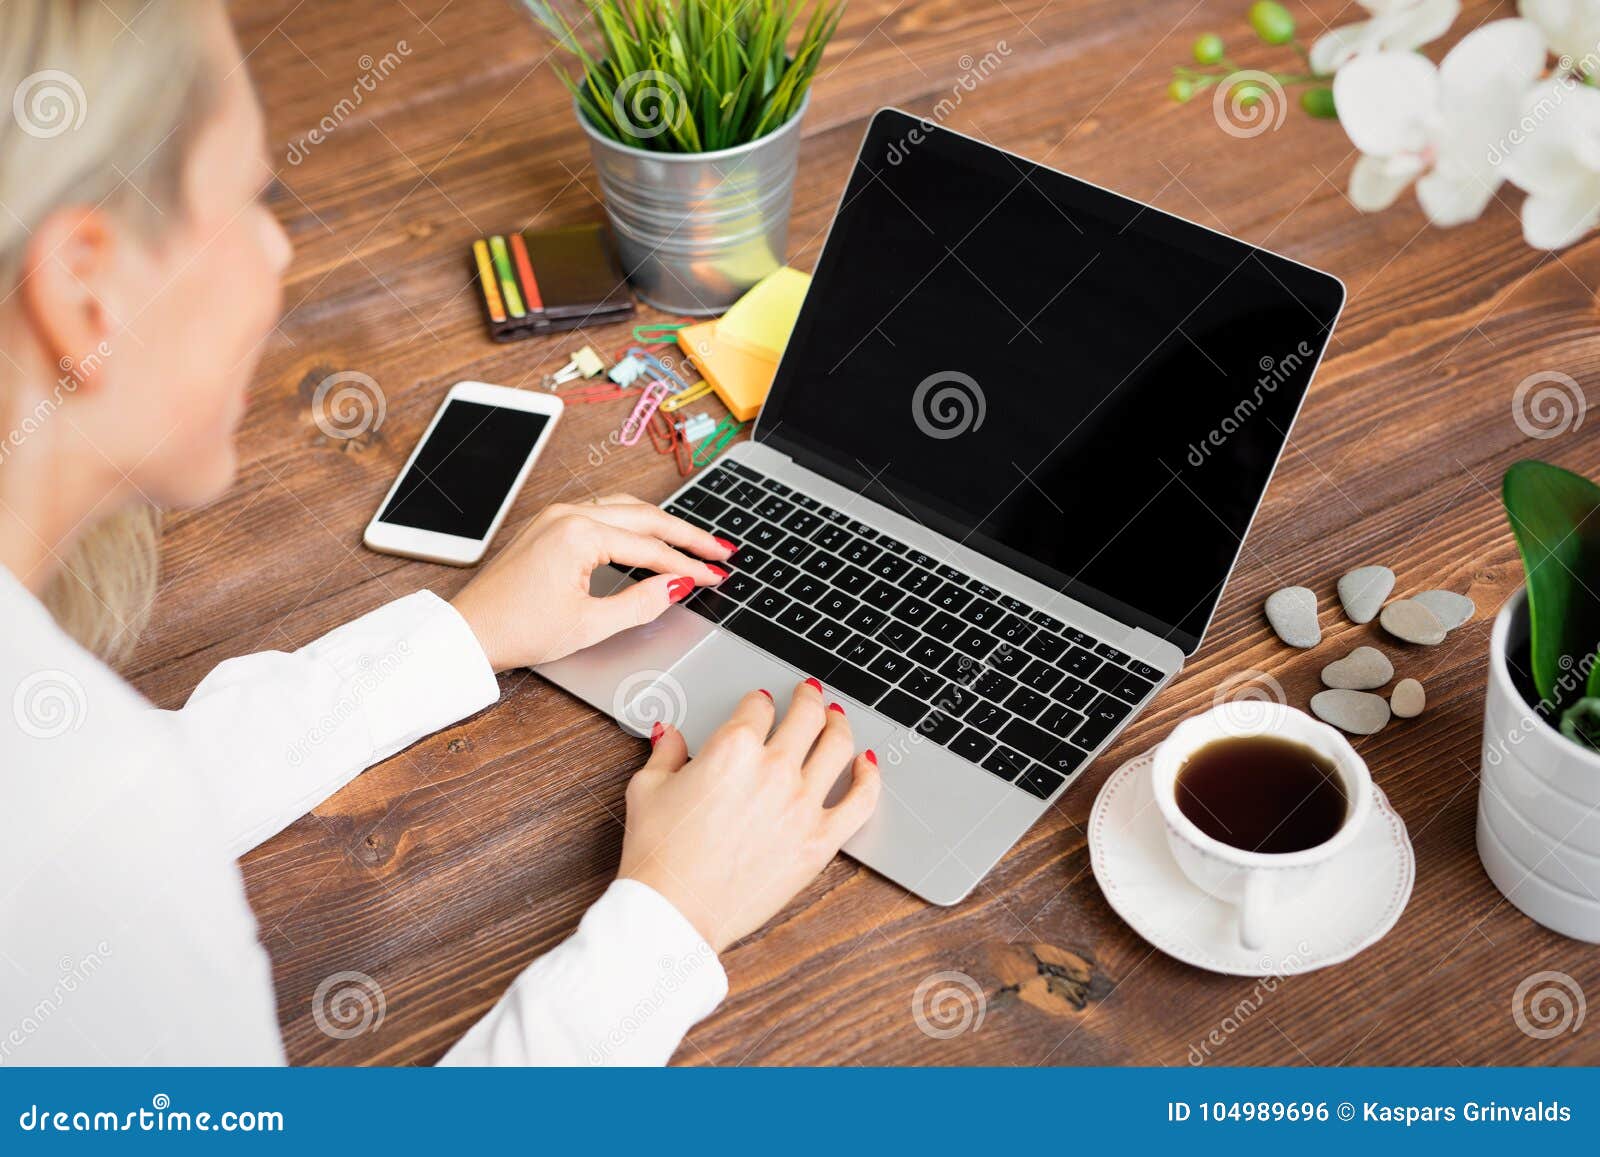 woman working with laptop computer.